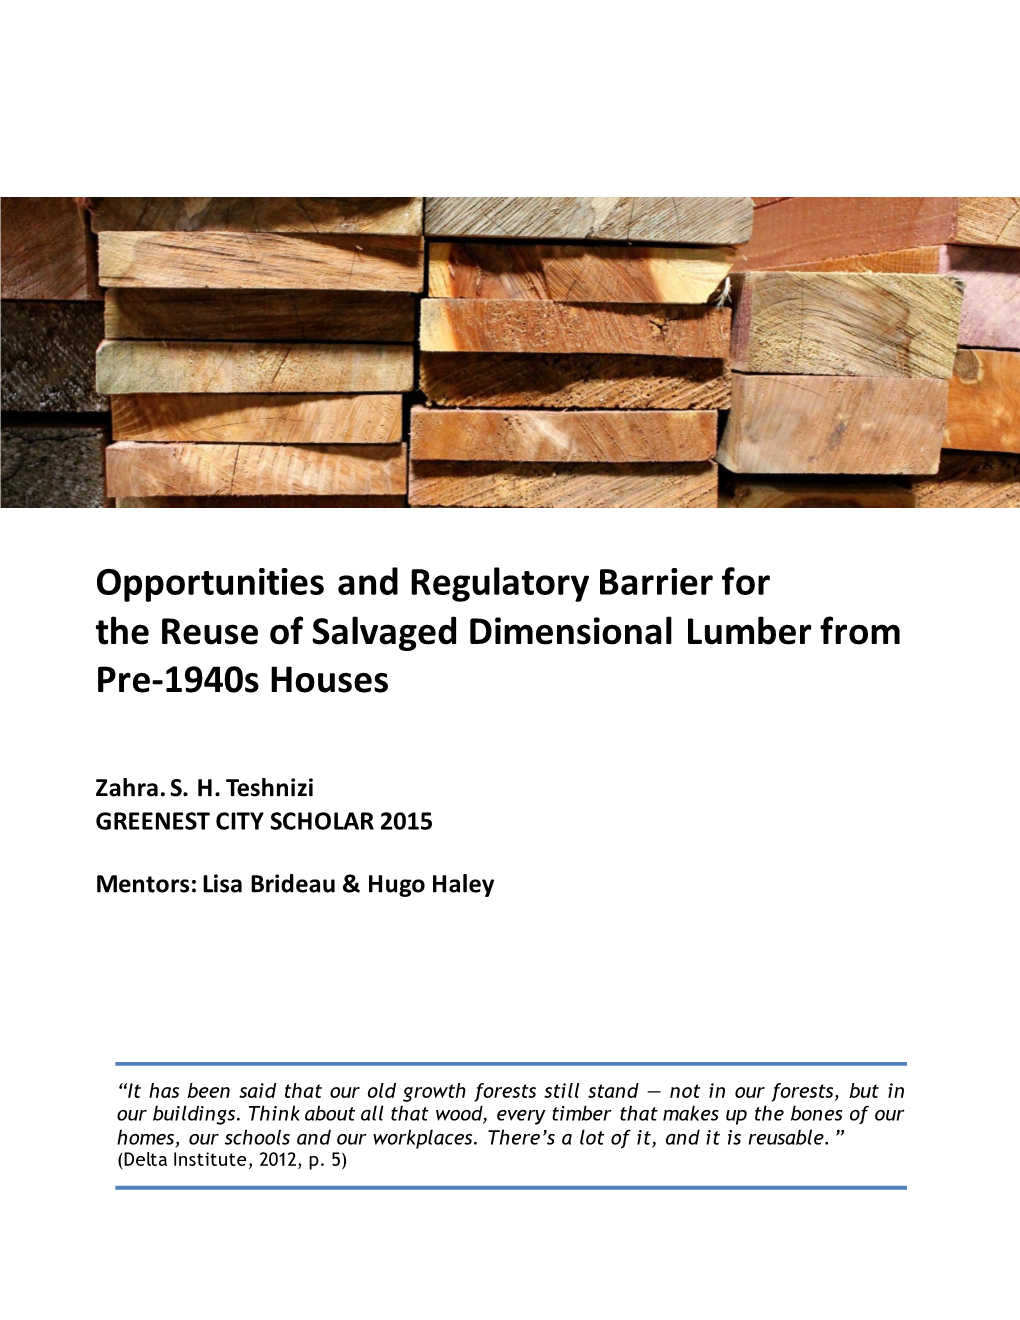 Opportunities and Regulatory Barrier for the Reuse of Salvaged Dimensional Lumber from Pre-1940S Houses